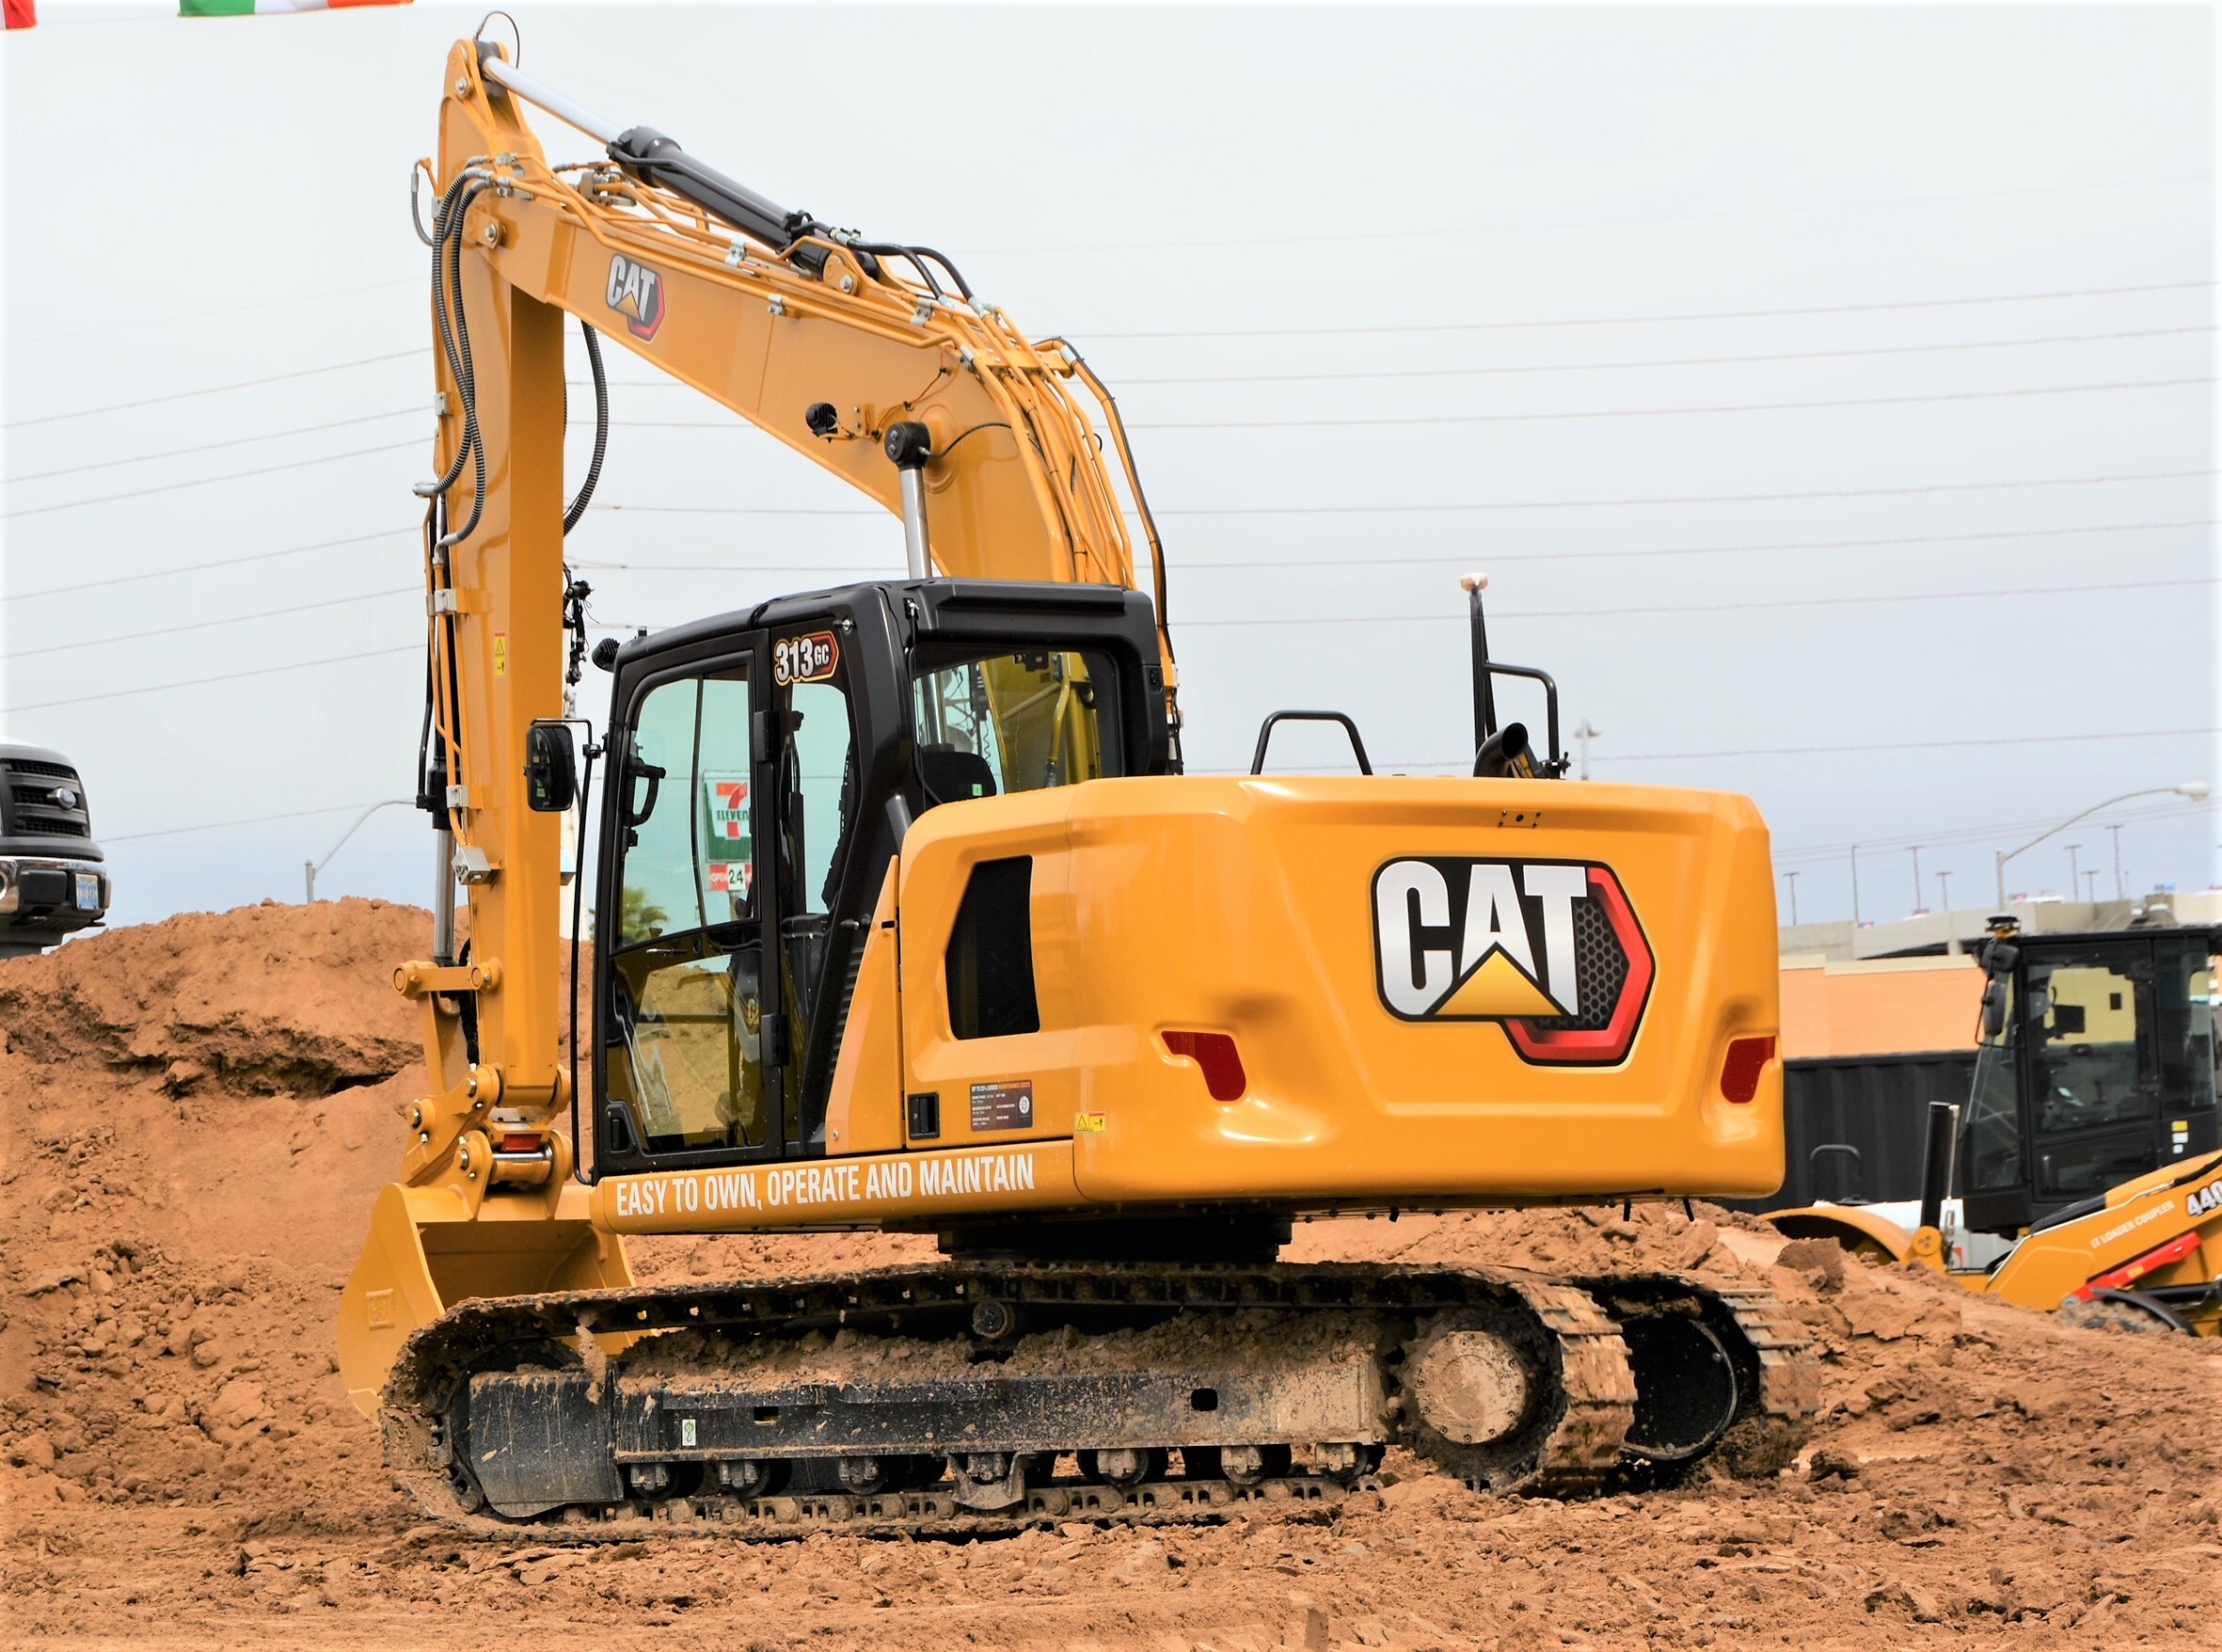 New Cat 13-Tonne Excavator Looks a Class Act